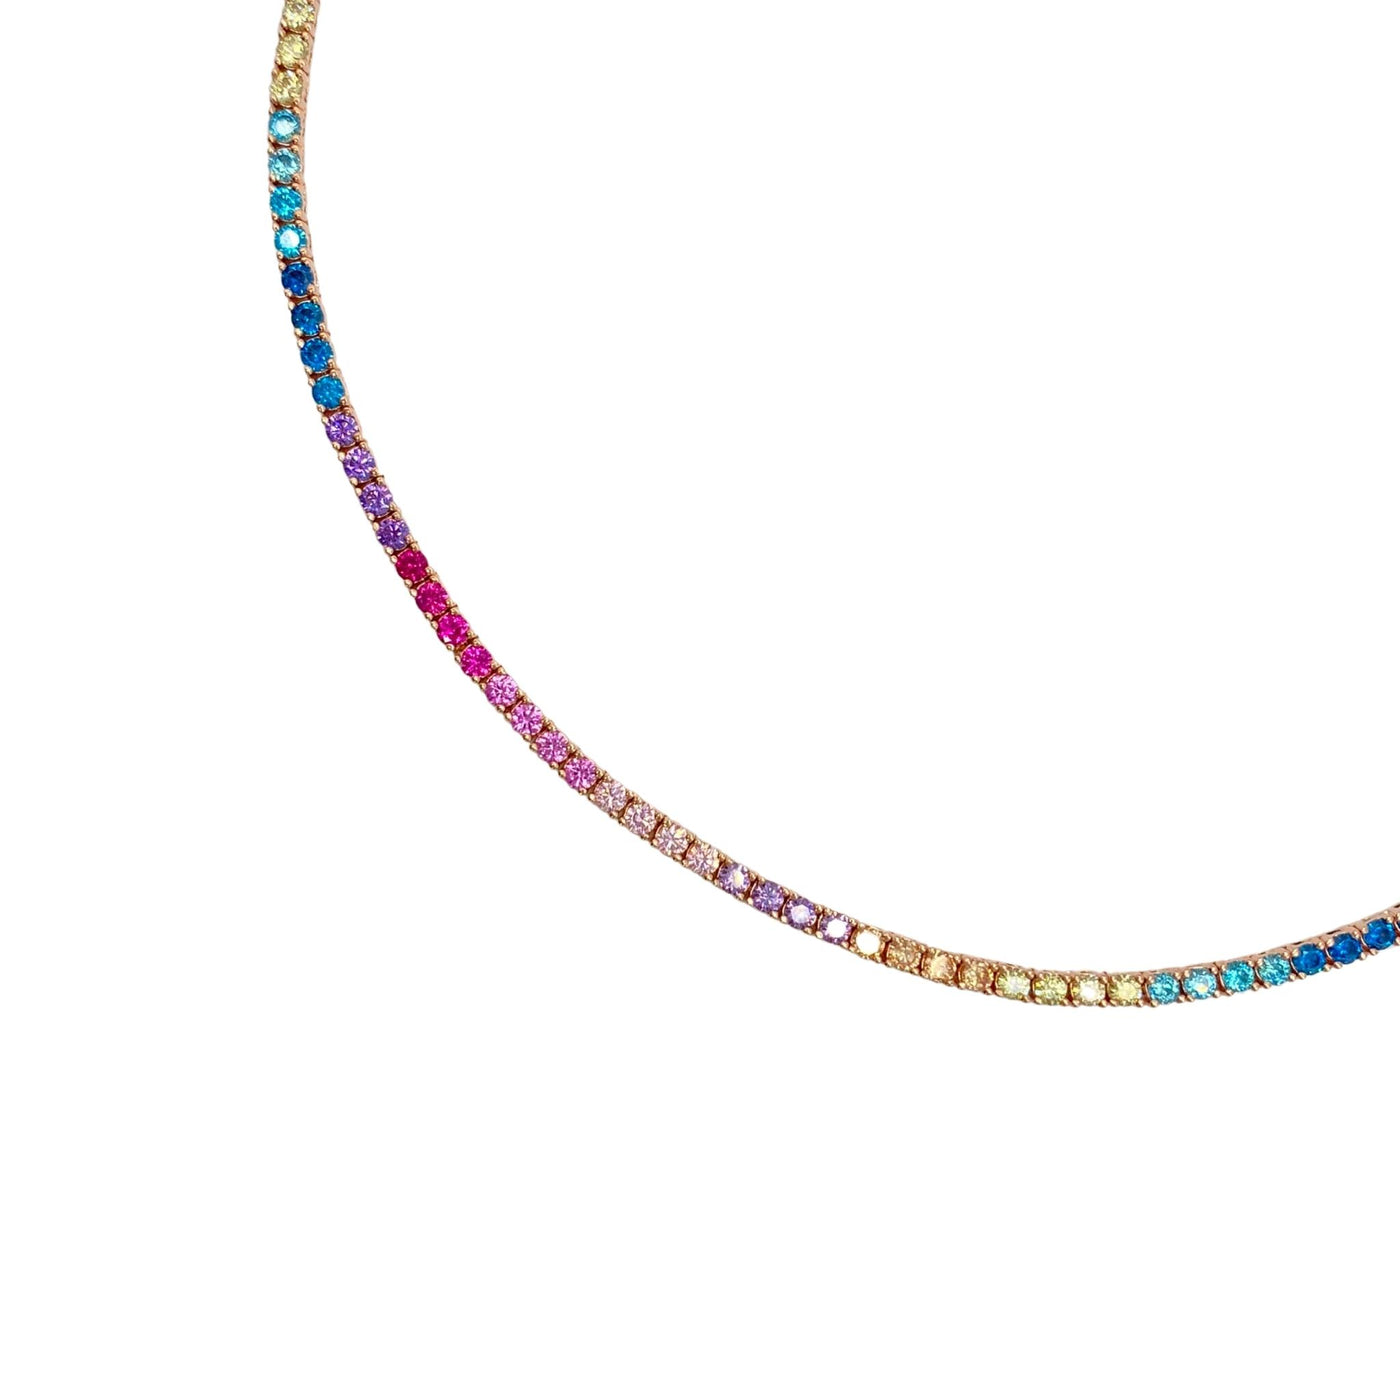 Silver casting tennis necklace with raimbow round stones - 2.5 mm